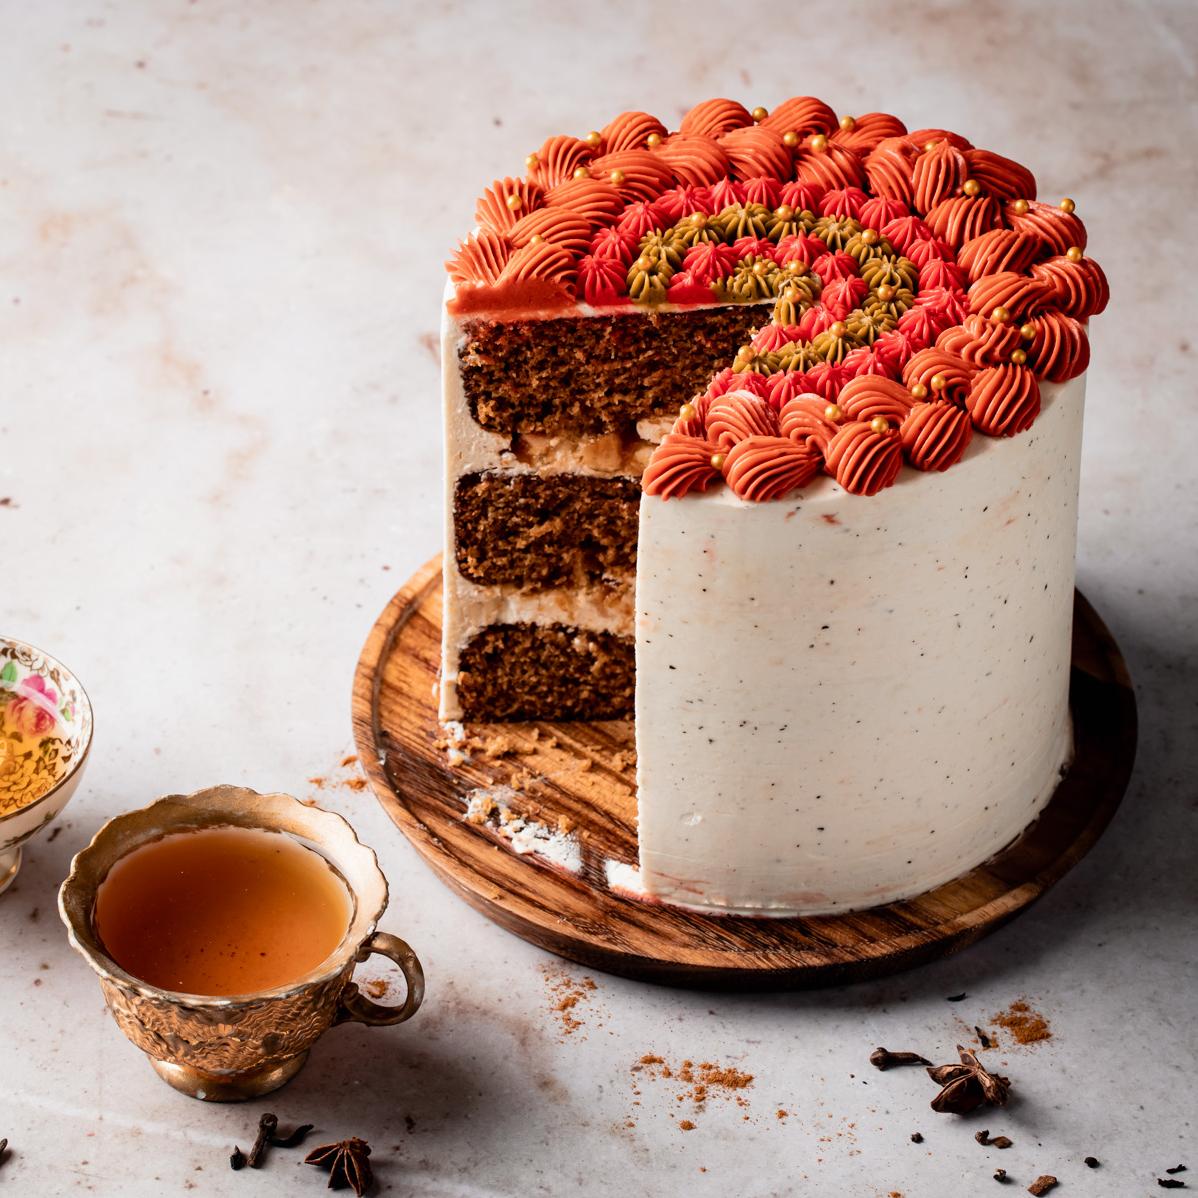  This cake will steal the show on your dessert table.